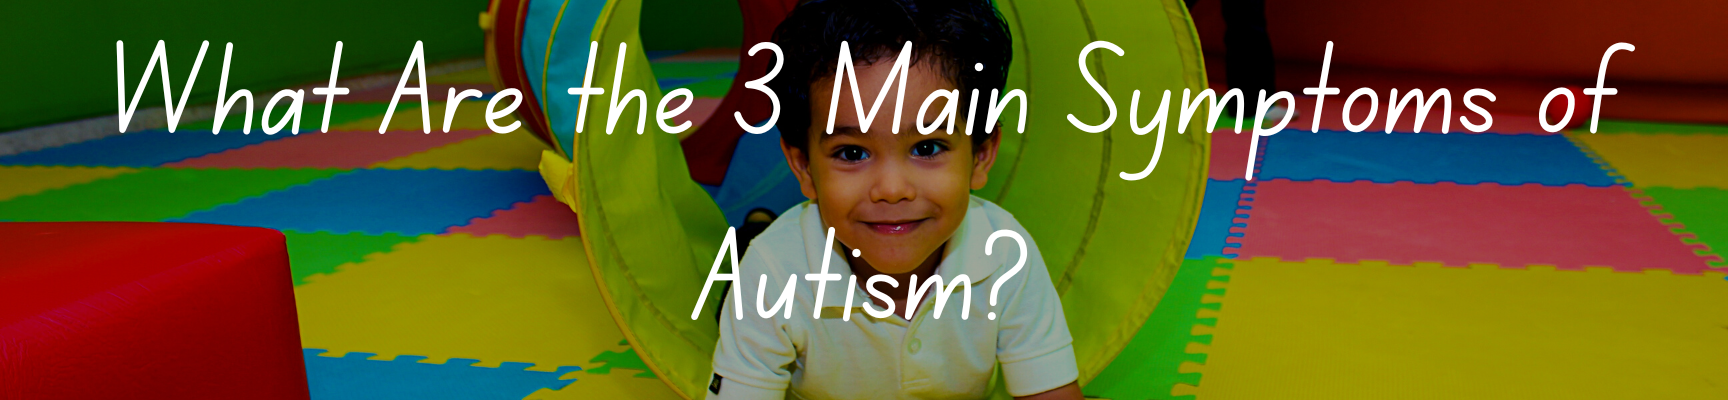 What Are the 3 Main Symptoms of Autism?